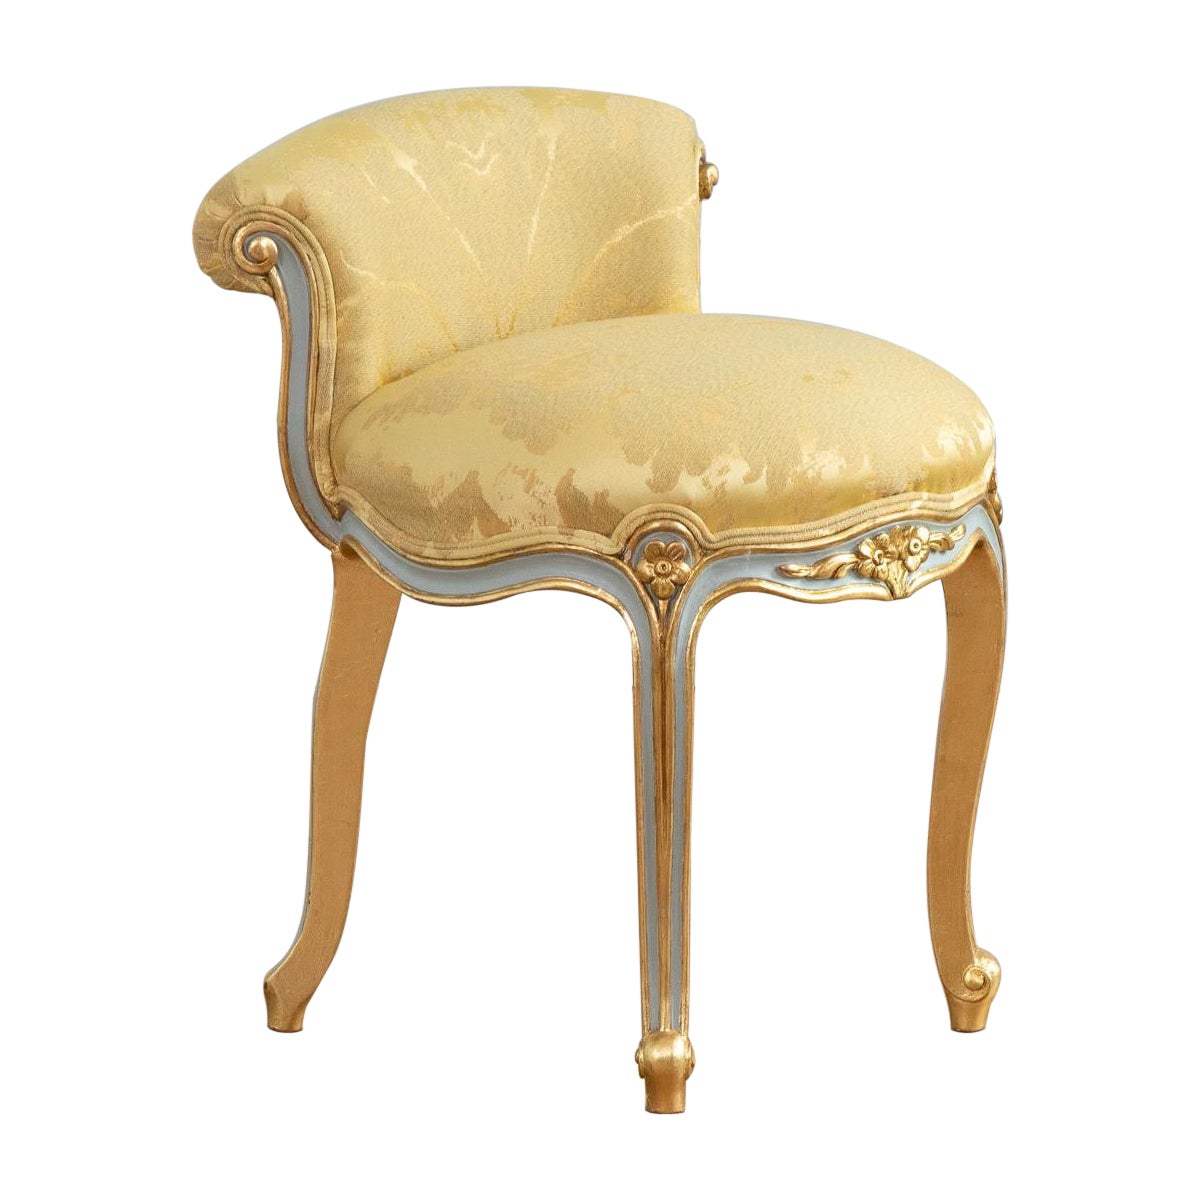 Louis XVI Crosse Renverse Stool Painted with Gold Highlights For Sale